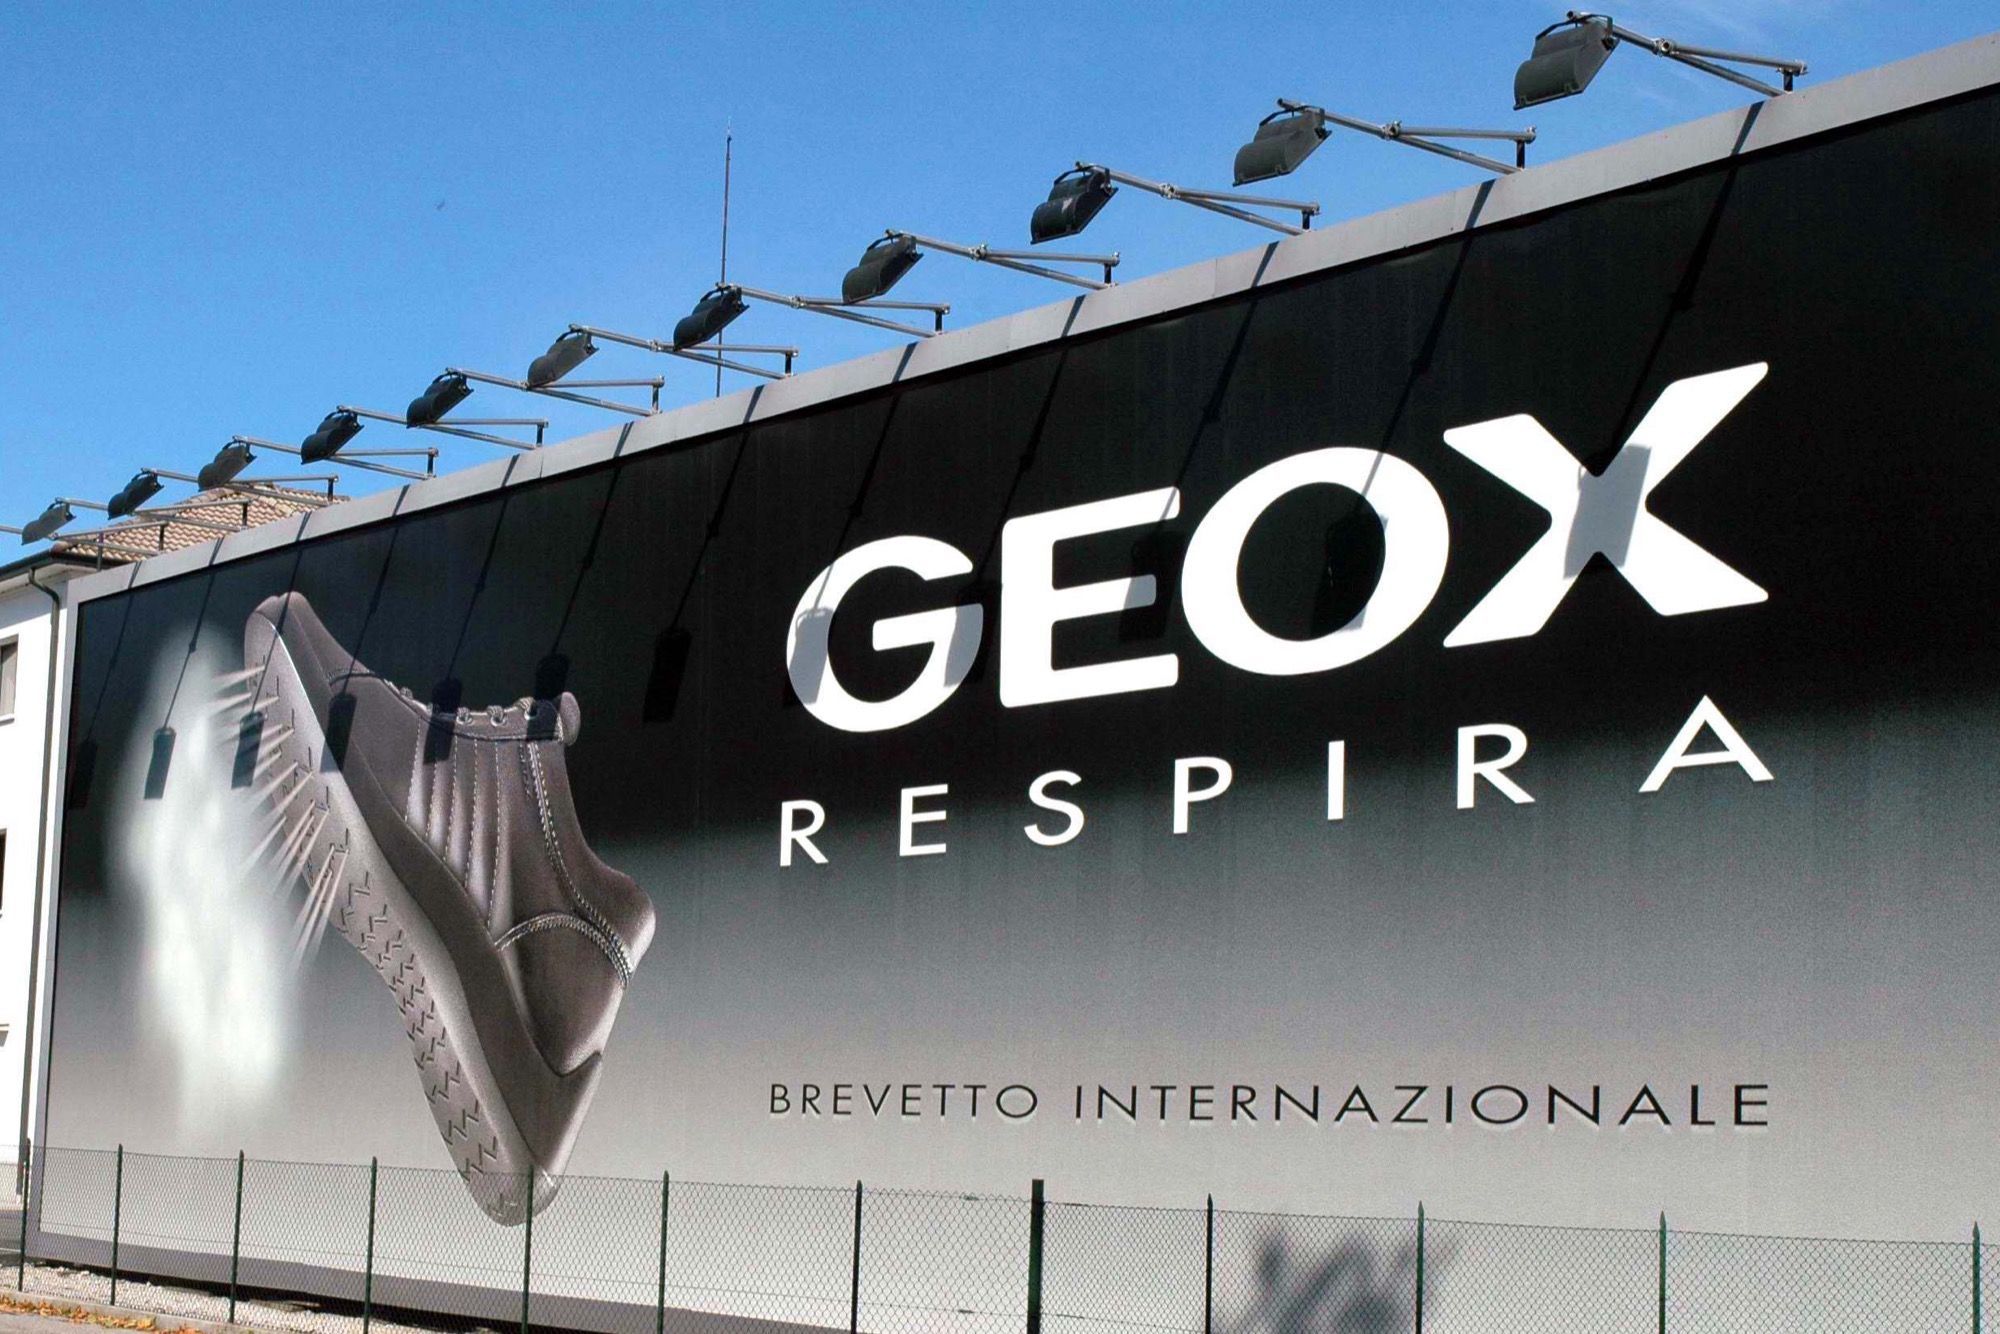 What to Geox, the of shoe that